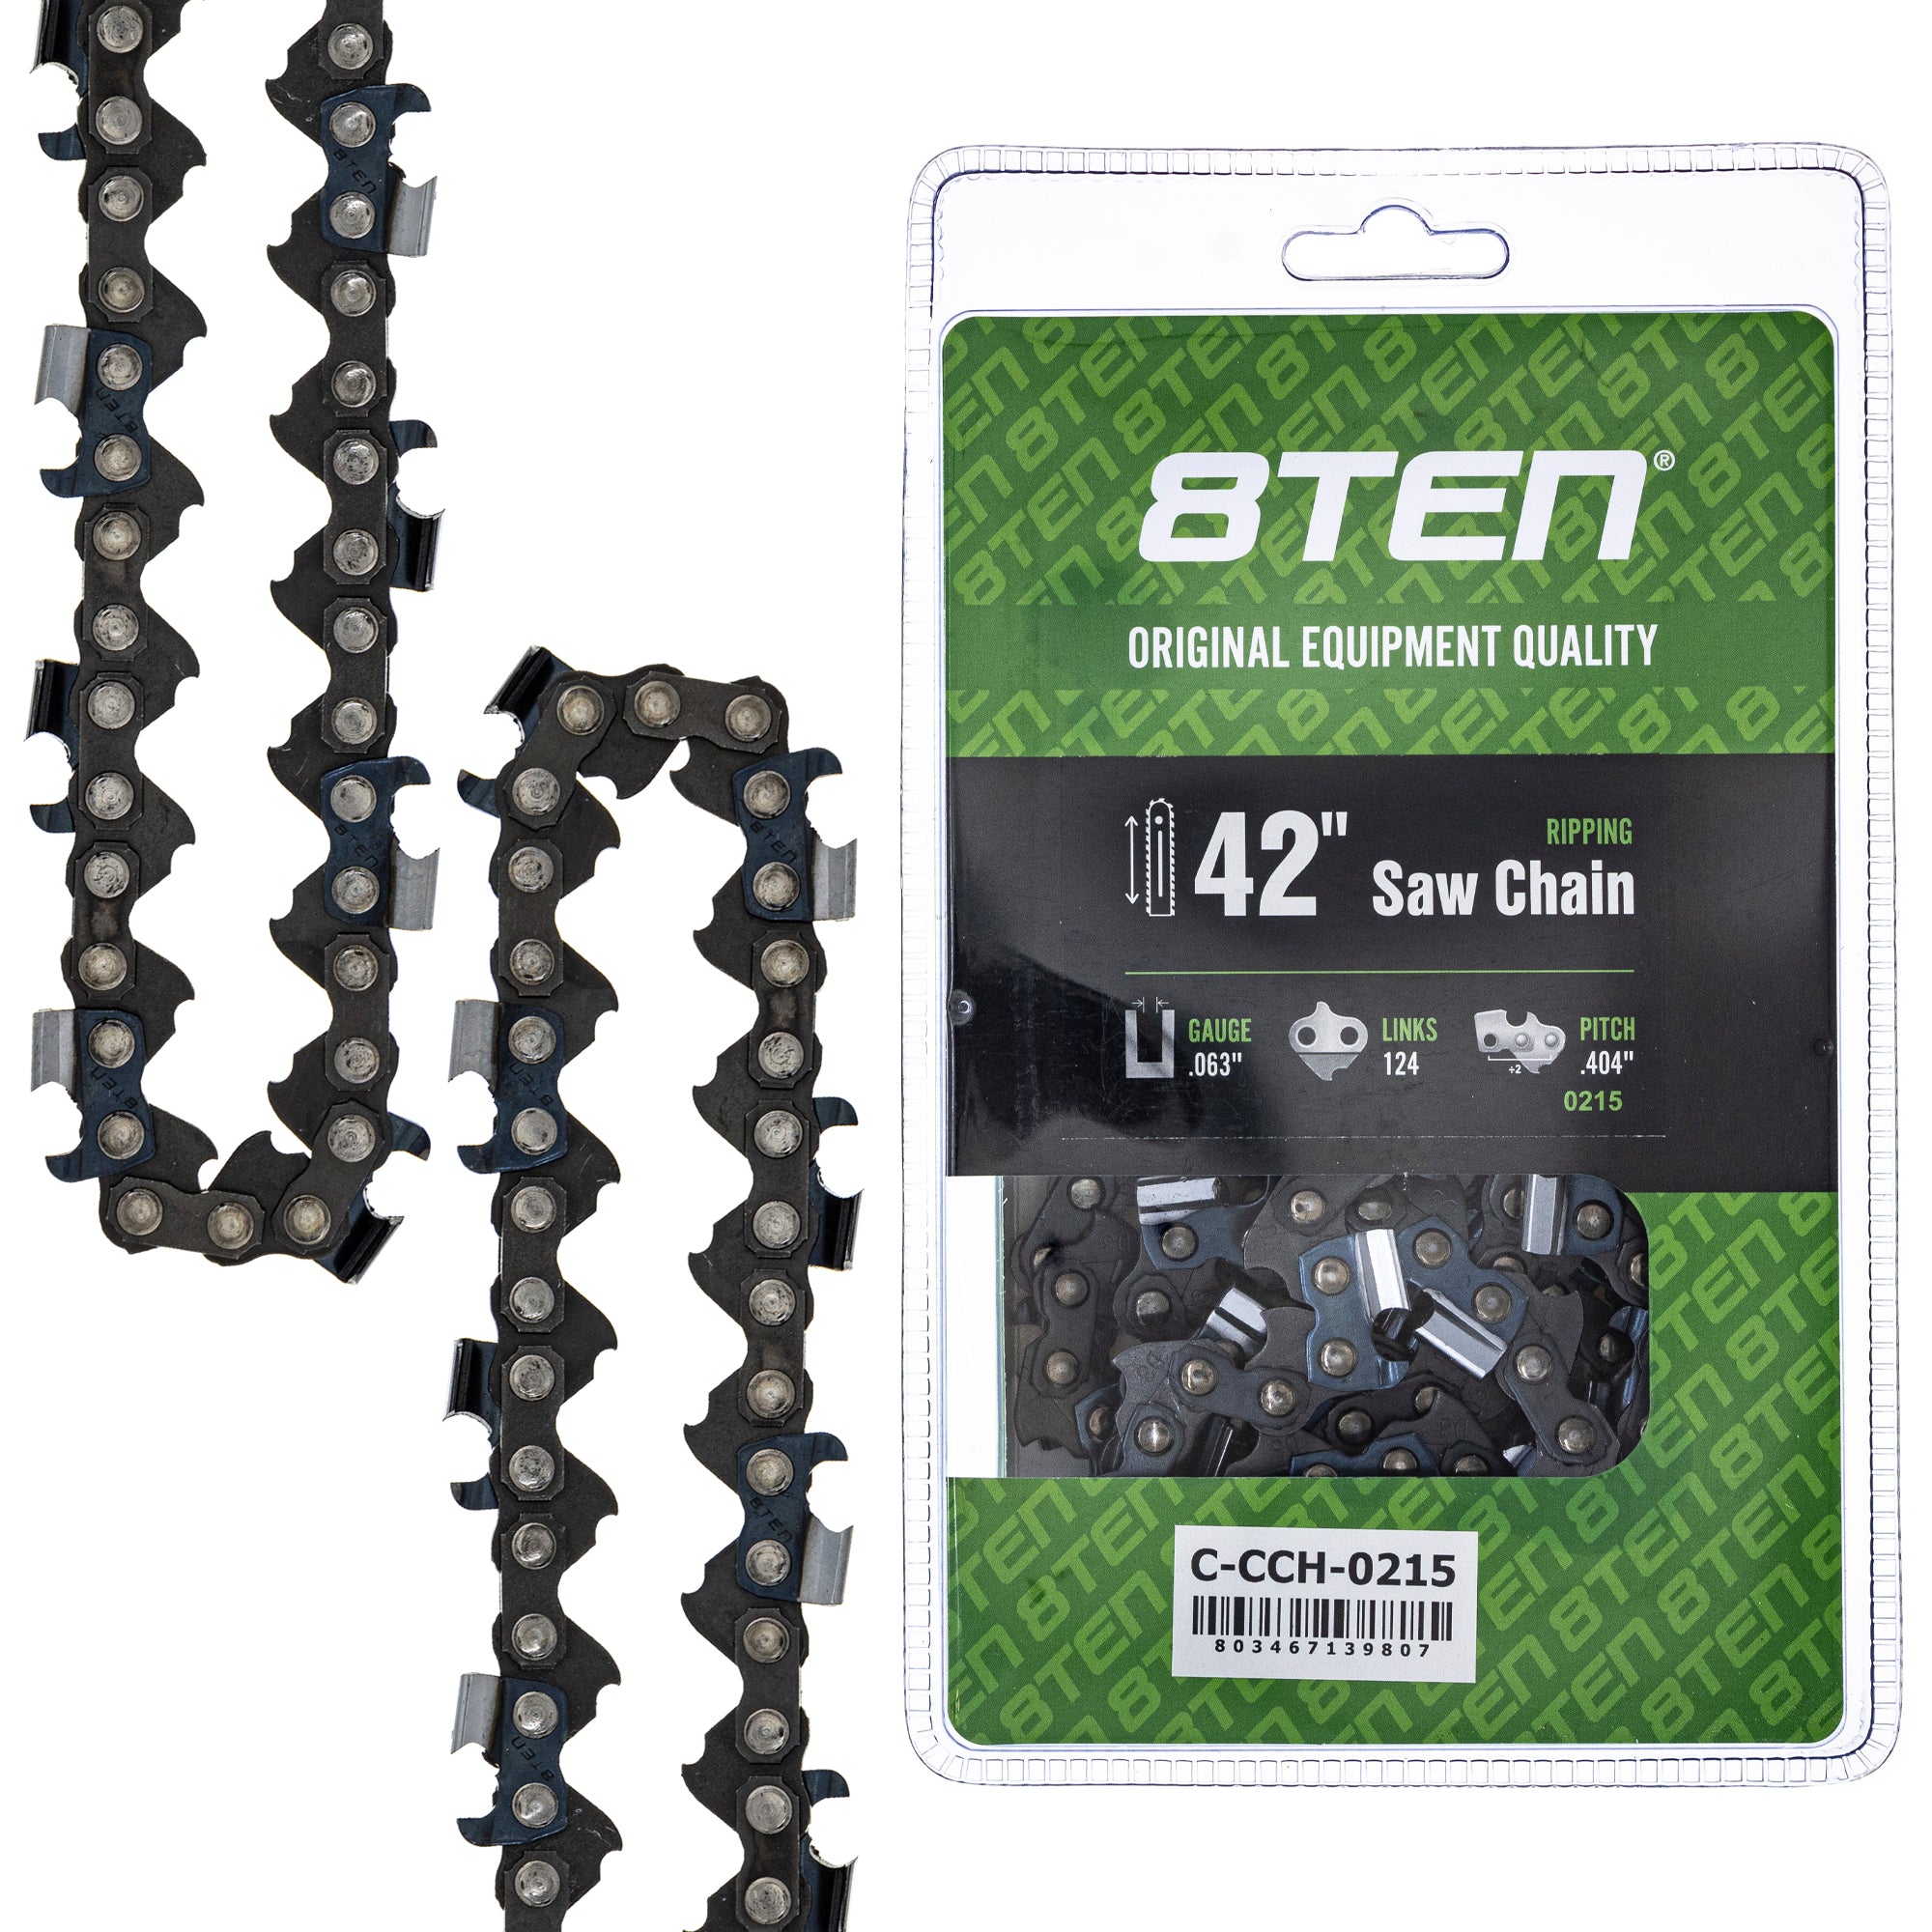 Chainsaw Chain 42 Inch .063 .404 124DL for zOTHER 8TEN 810-CCC2437H